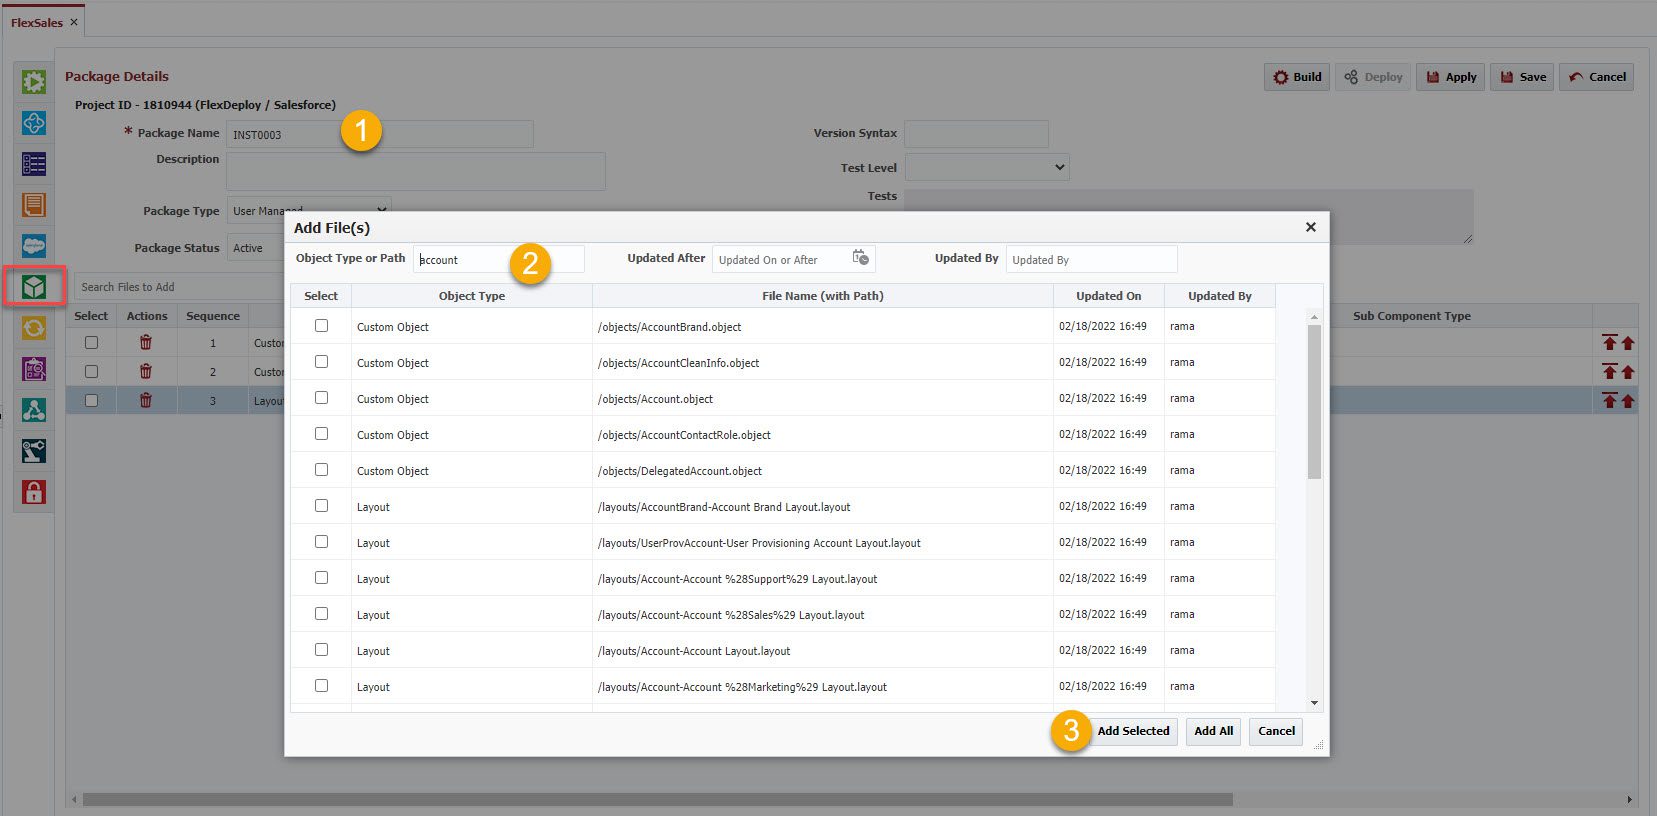 Package Details window in FlexDeploy for Salesforce